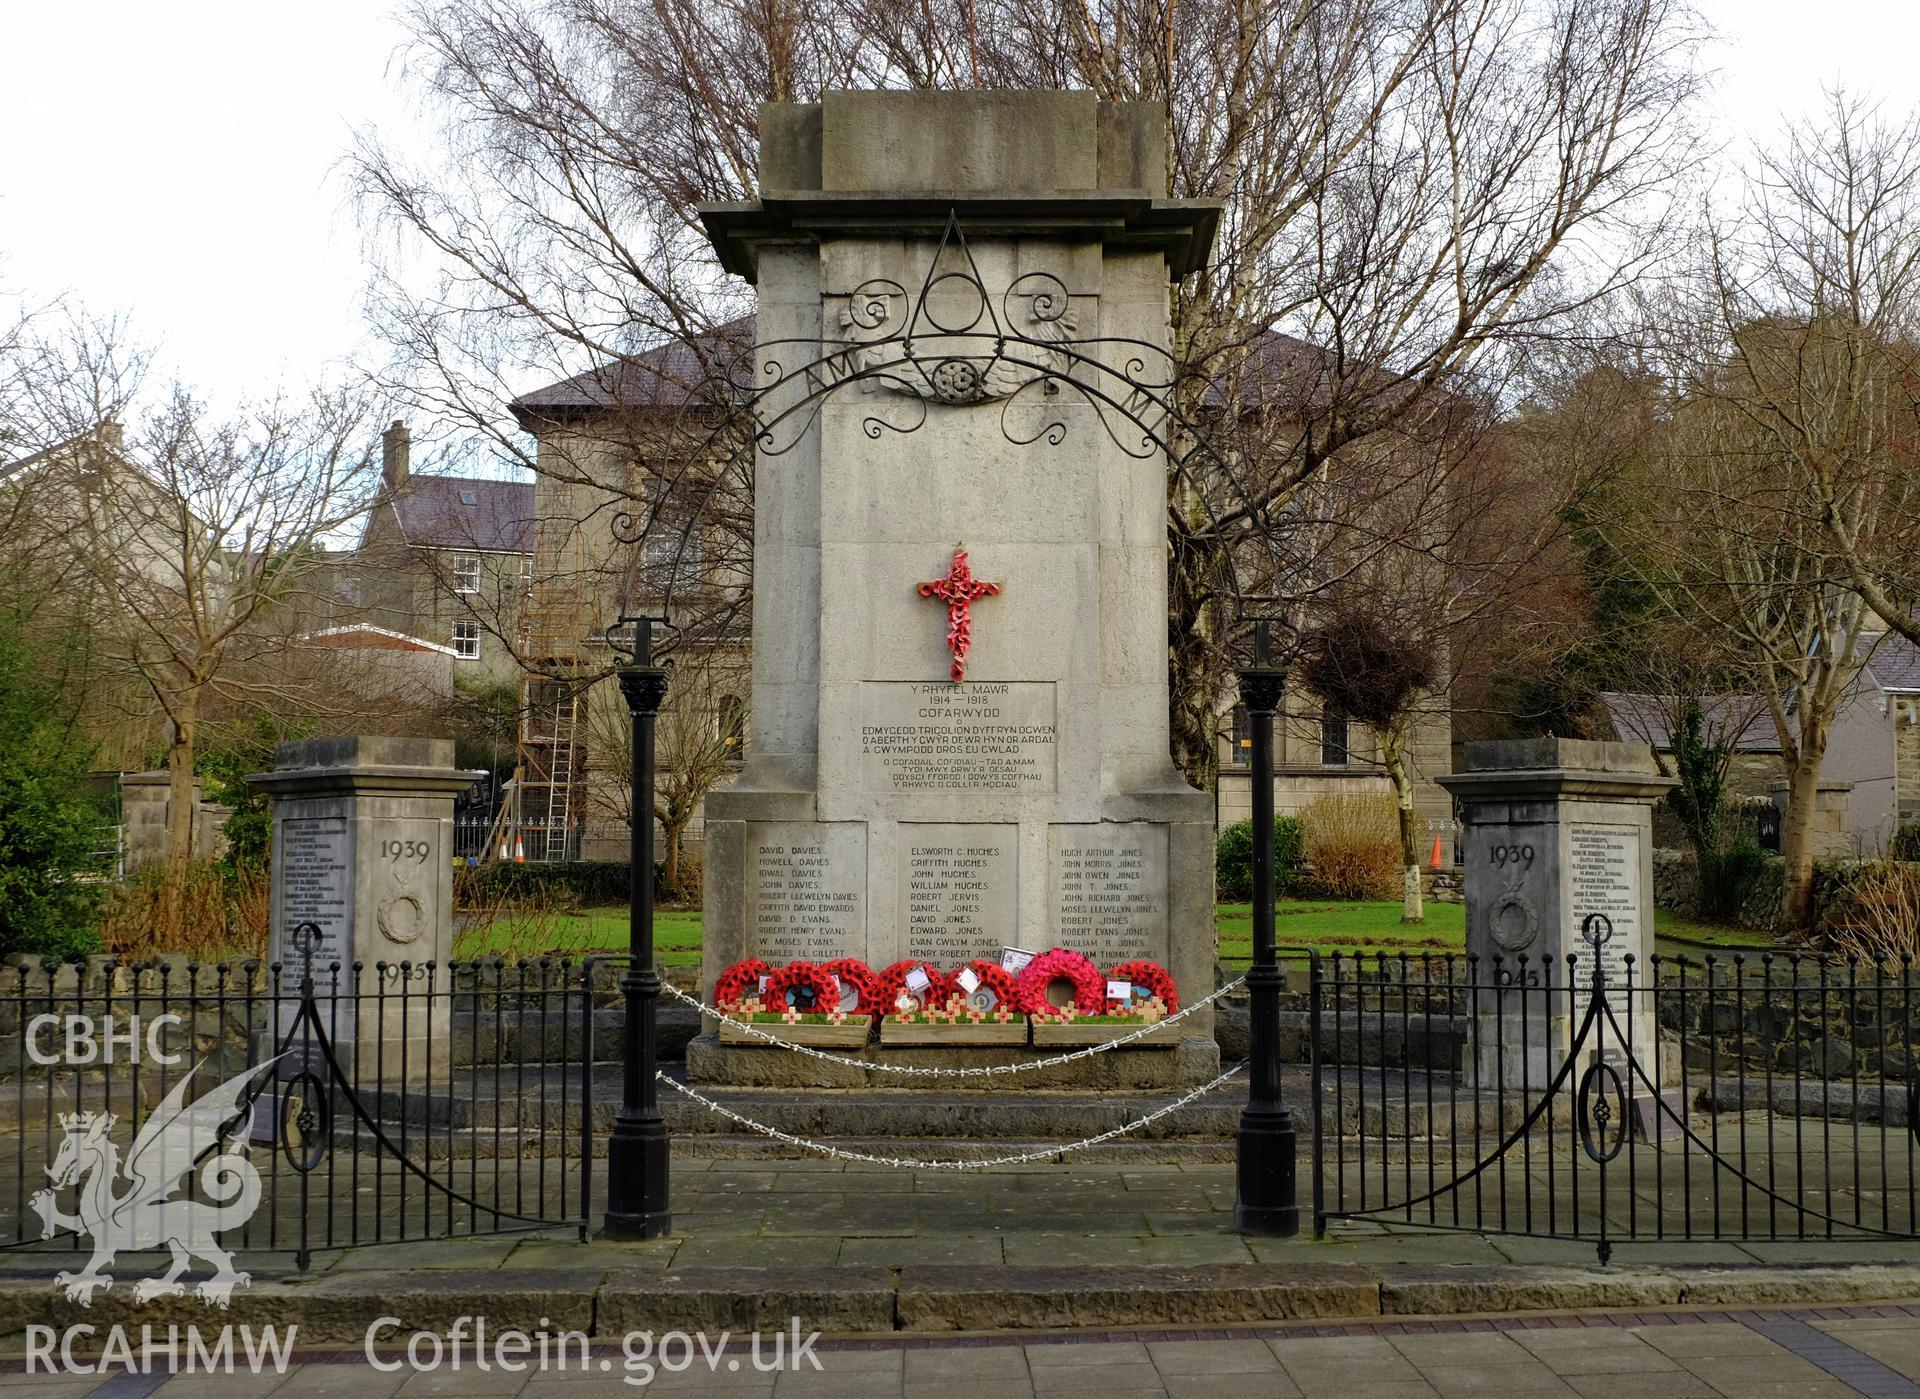 Colour photograph showing a view of Bethesda War Memorial, looking north, produced by Richard Hayman 16th February 2017